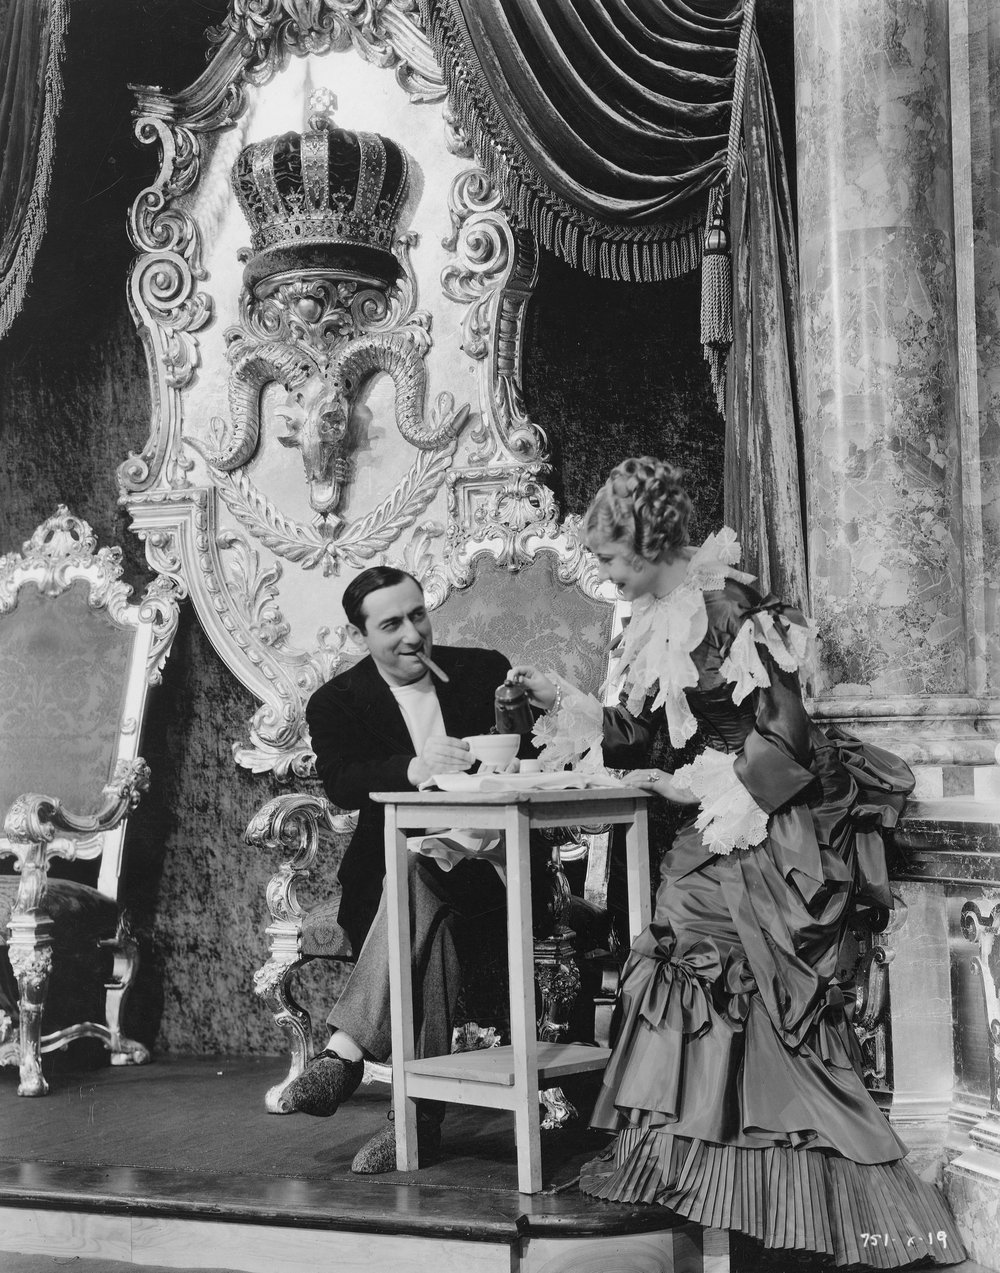 Lubitsch and Macdonald between takes.